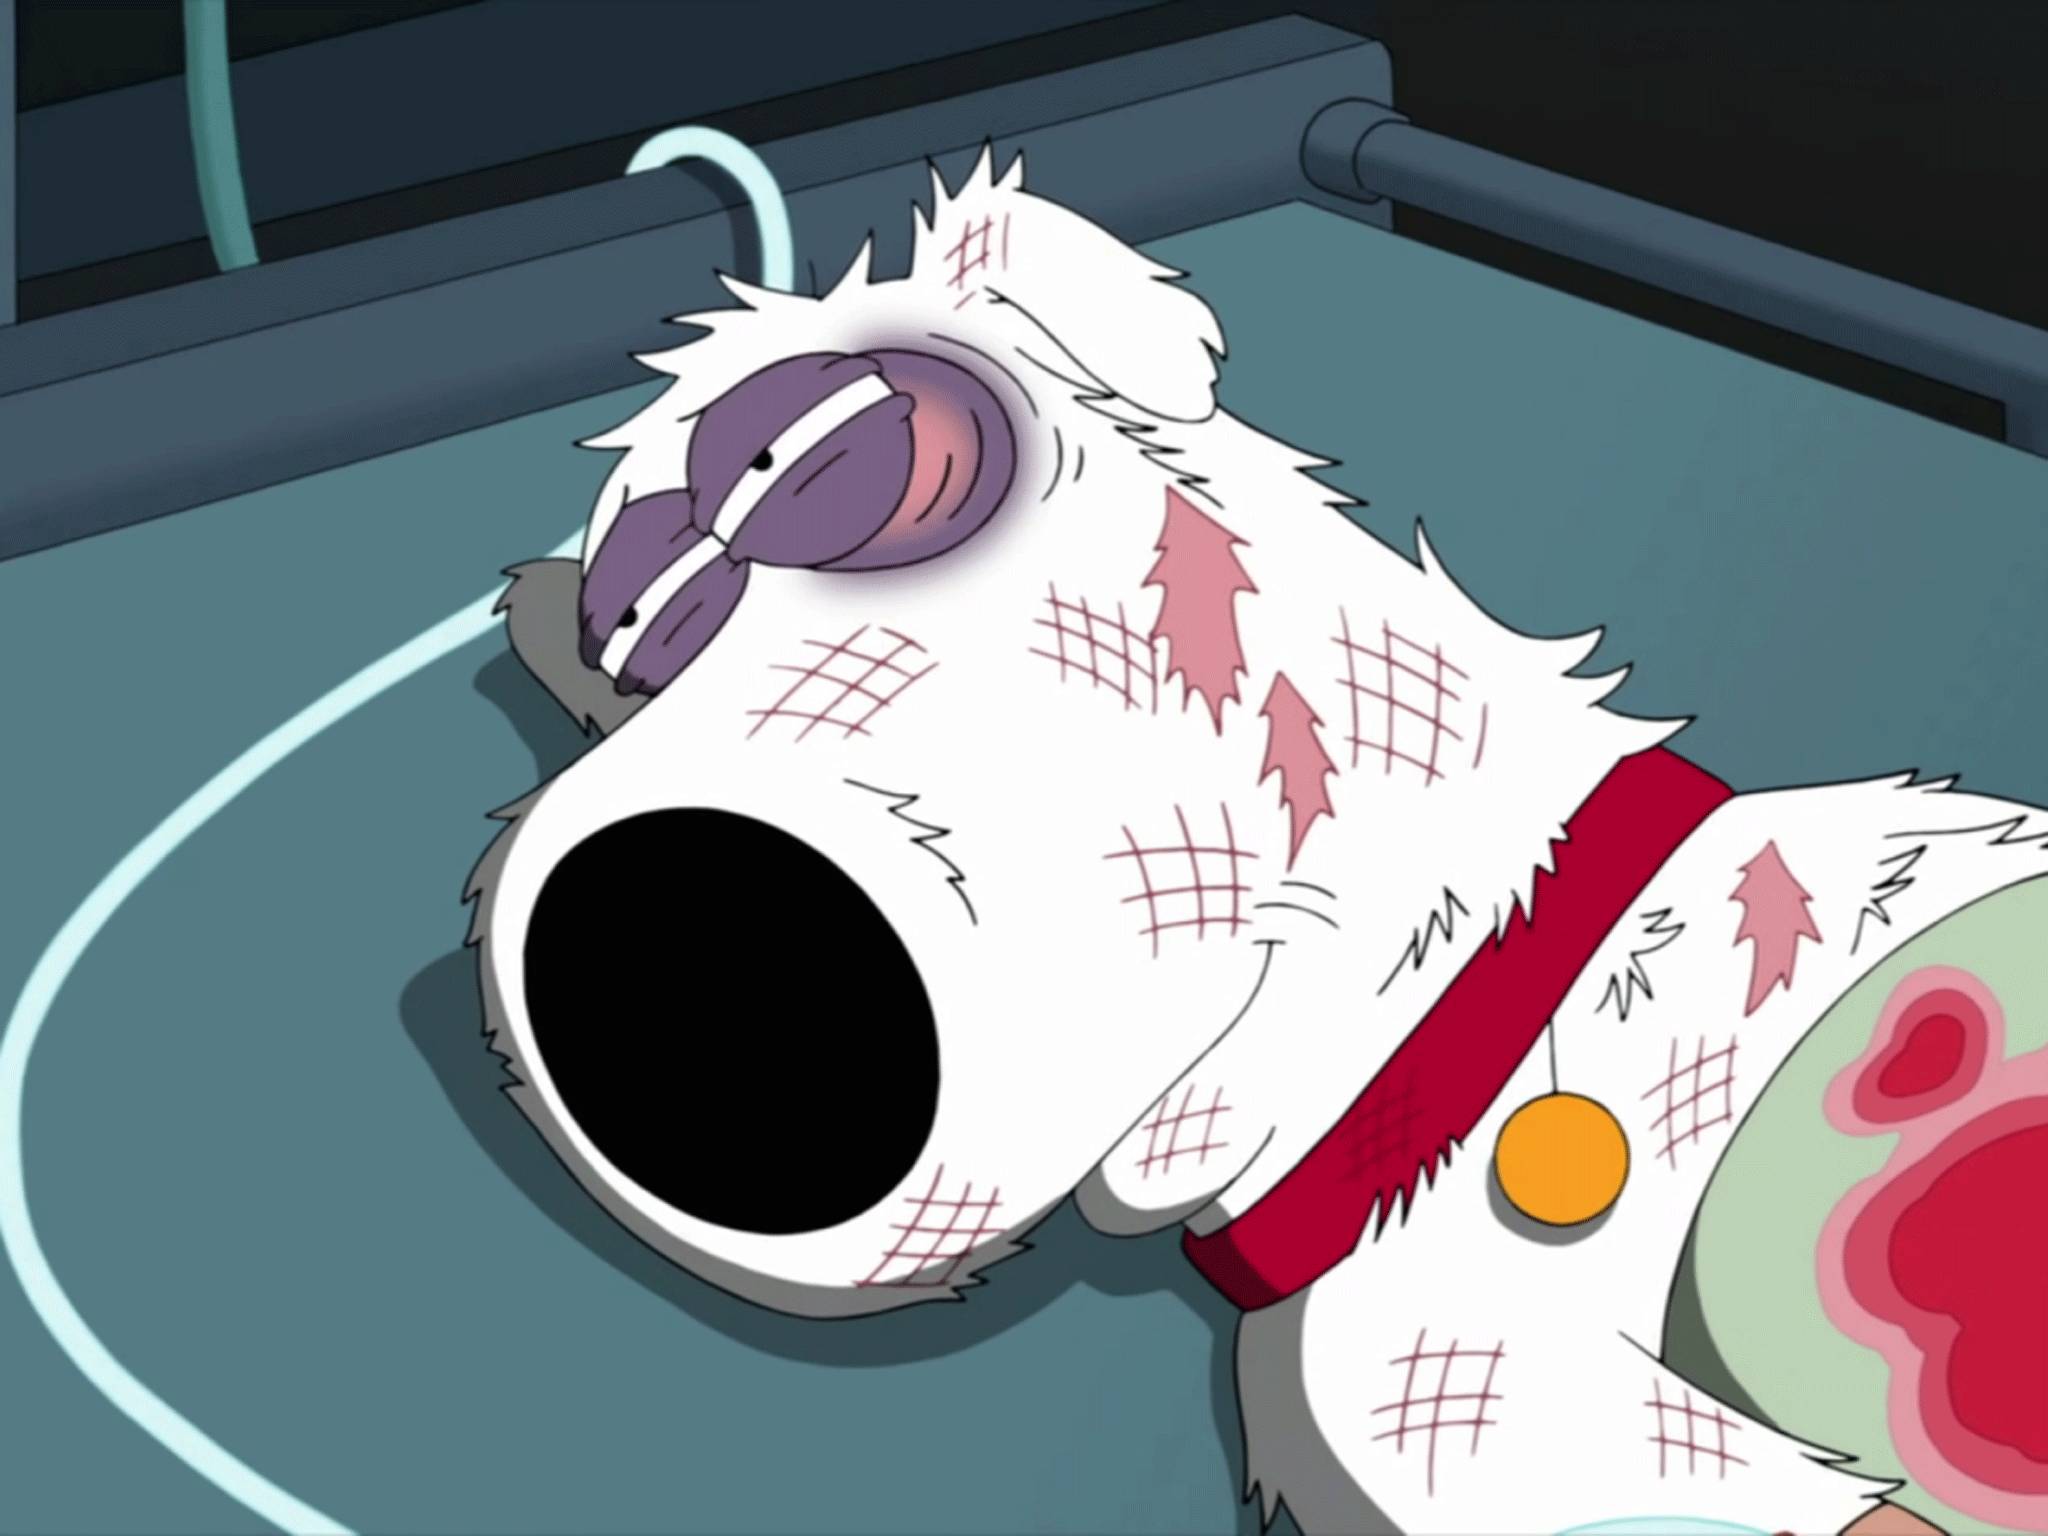 Brian Griffin was killed in a car accident on Family Guy